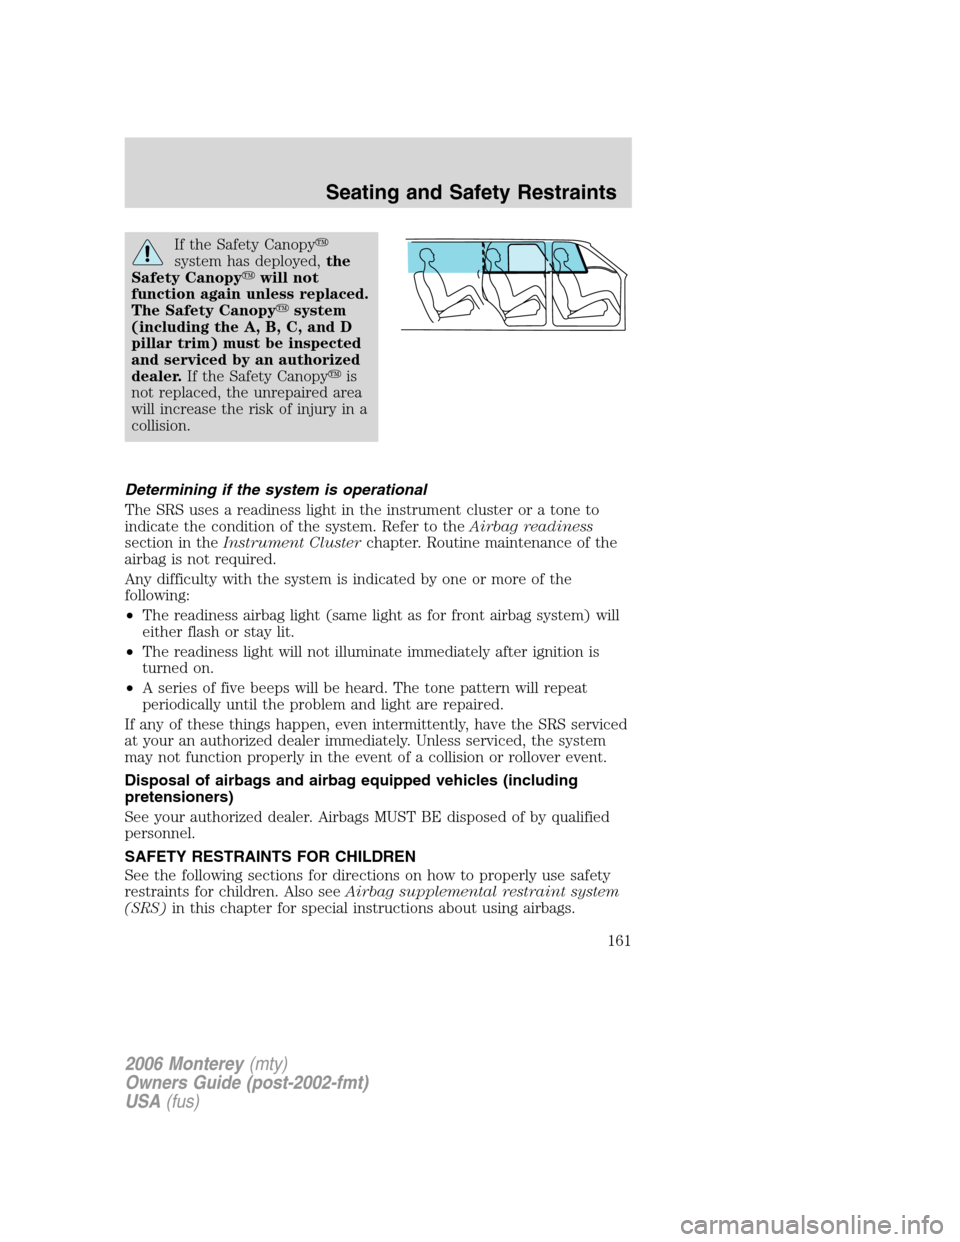 Mercury Monterey 2006  s User Guide If the Safety Canopy
system has deployed,the
Safety Canopywill not
function again unless replaced.
The Safety Canopysystem
(including the A, B, C, and D
pillar trim) must be inspected
and serviced 